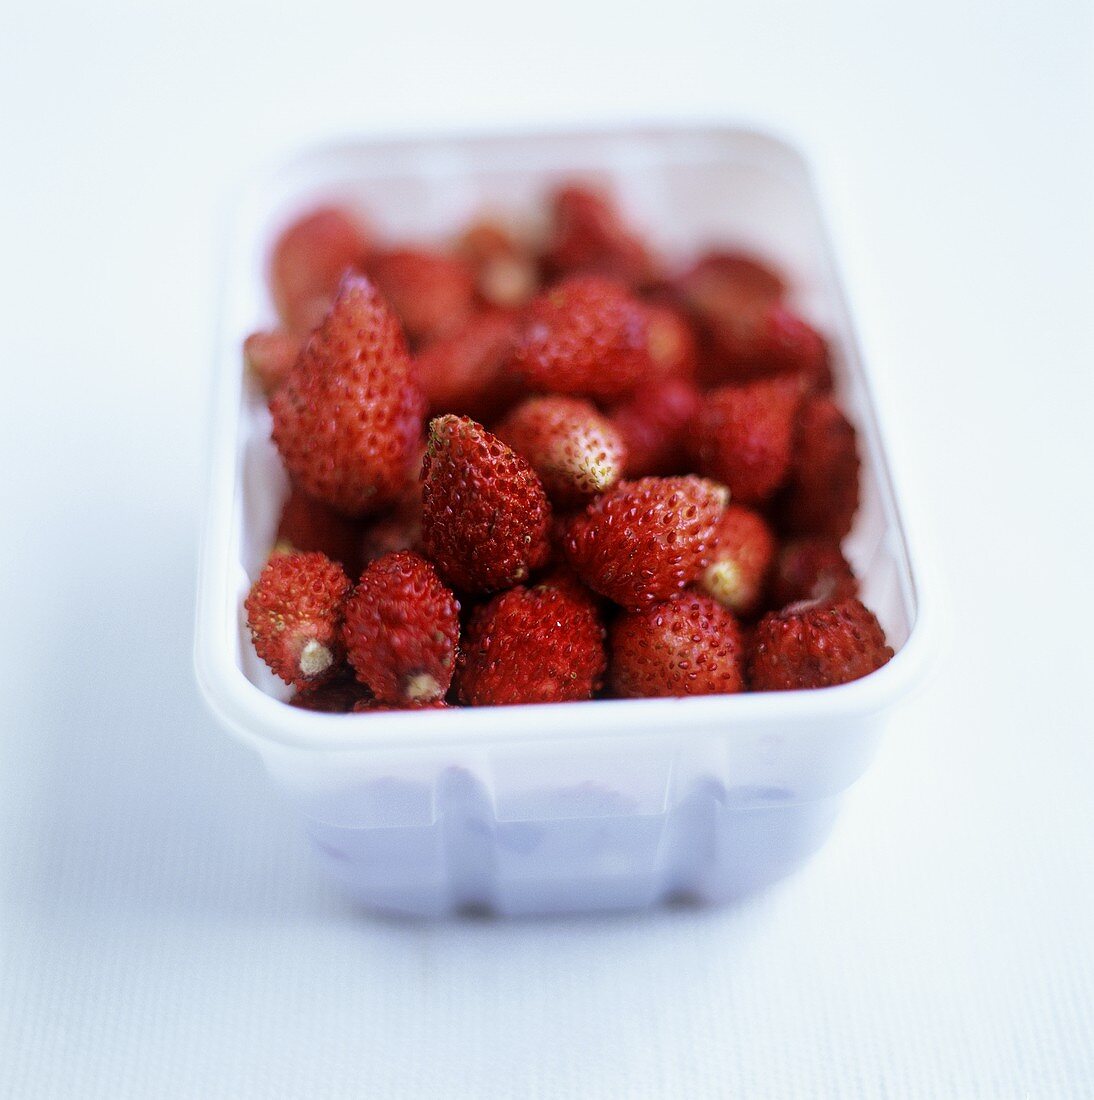 Container of fresh wild strawberries